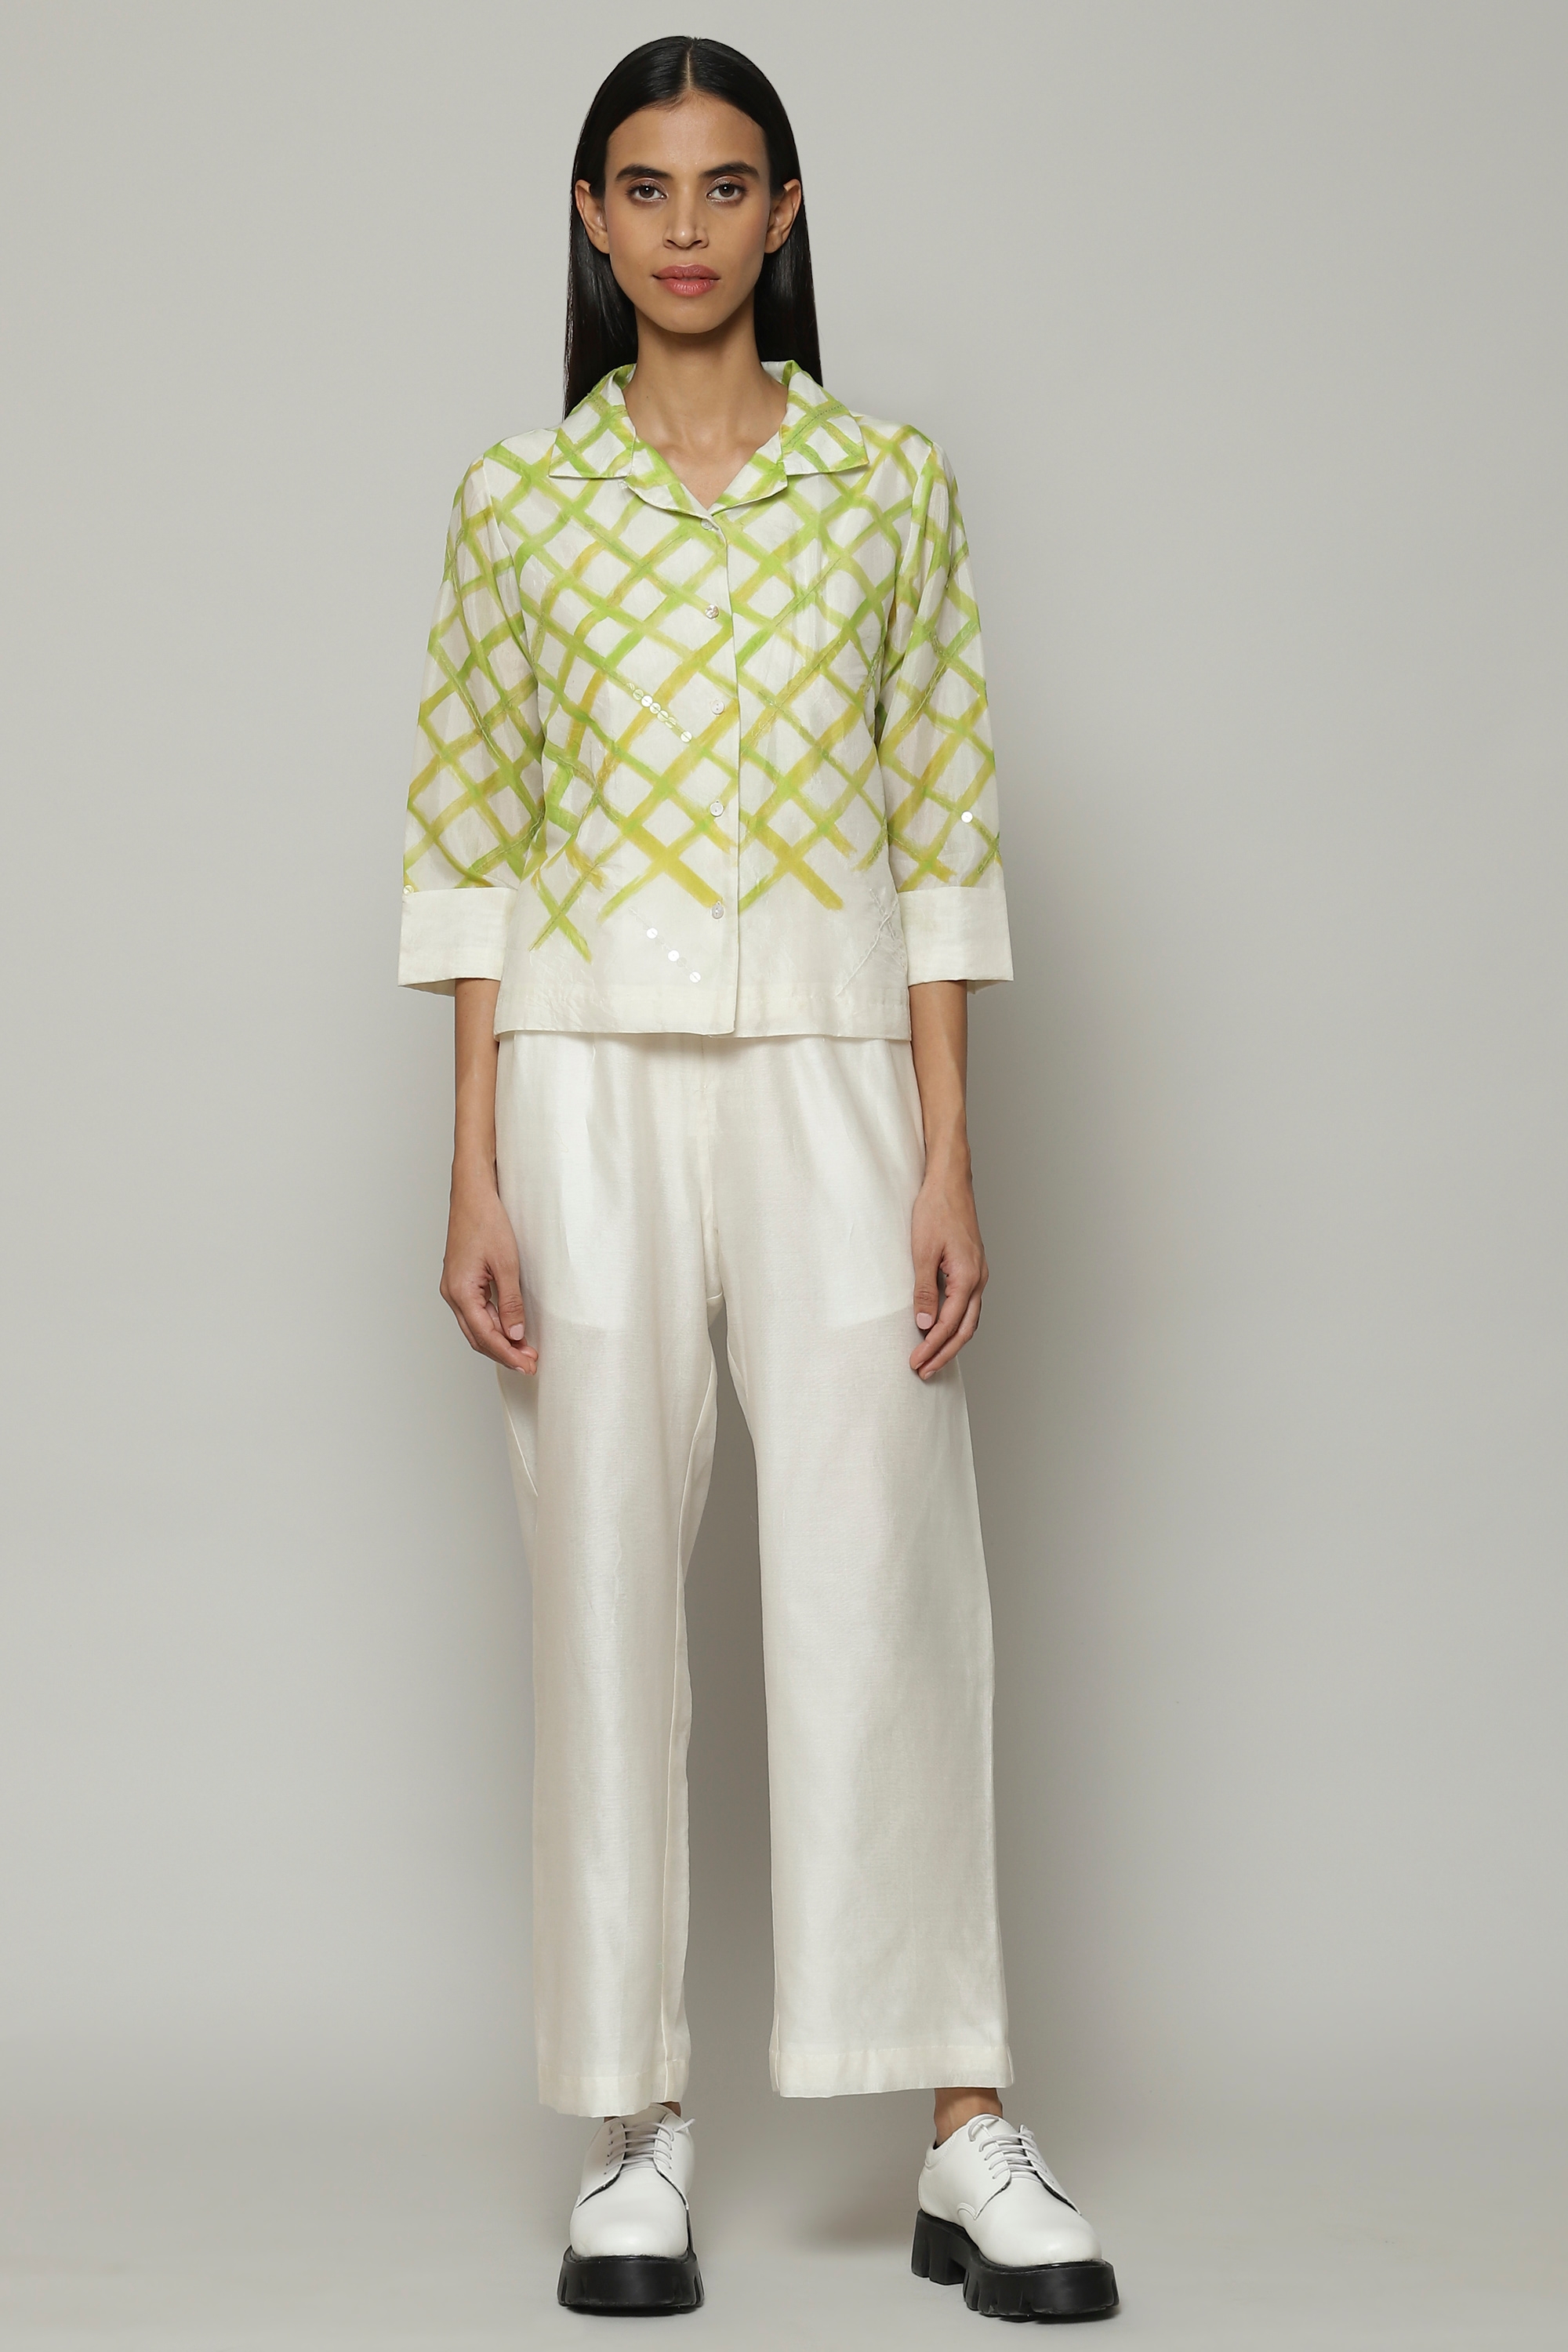 ABRAHAM AND THAKORE | Lattice Printed Luxe Voile Shirt Ivory Lime